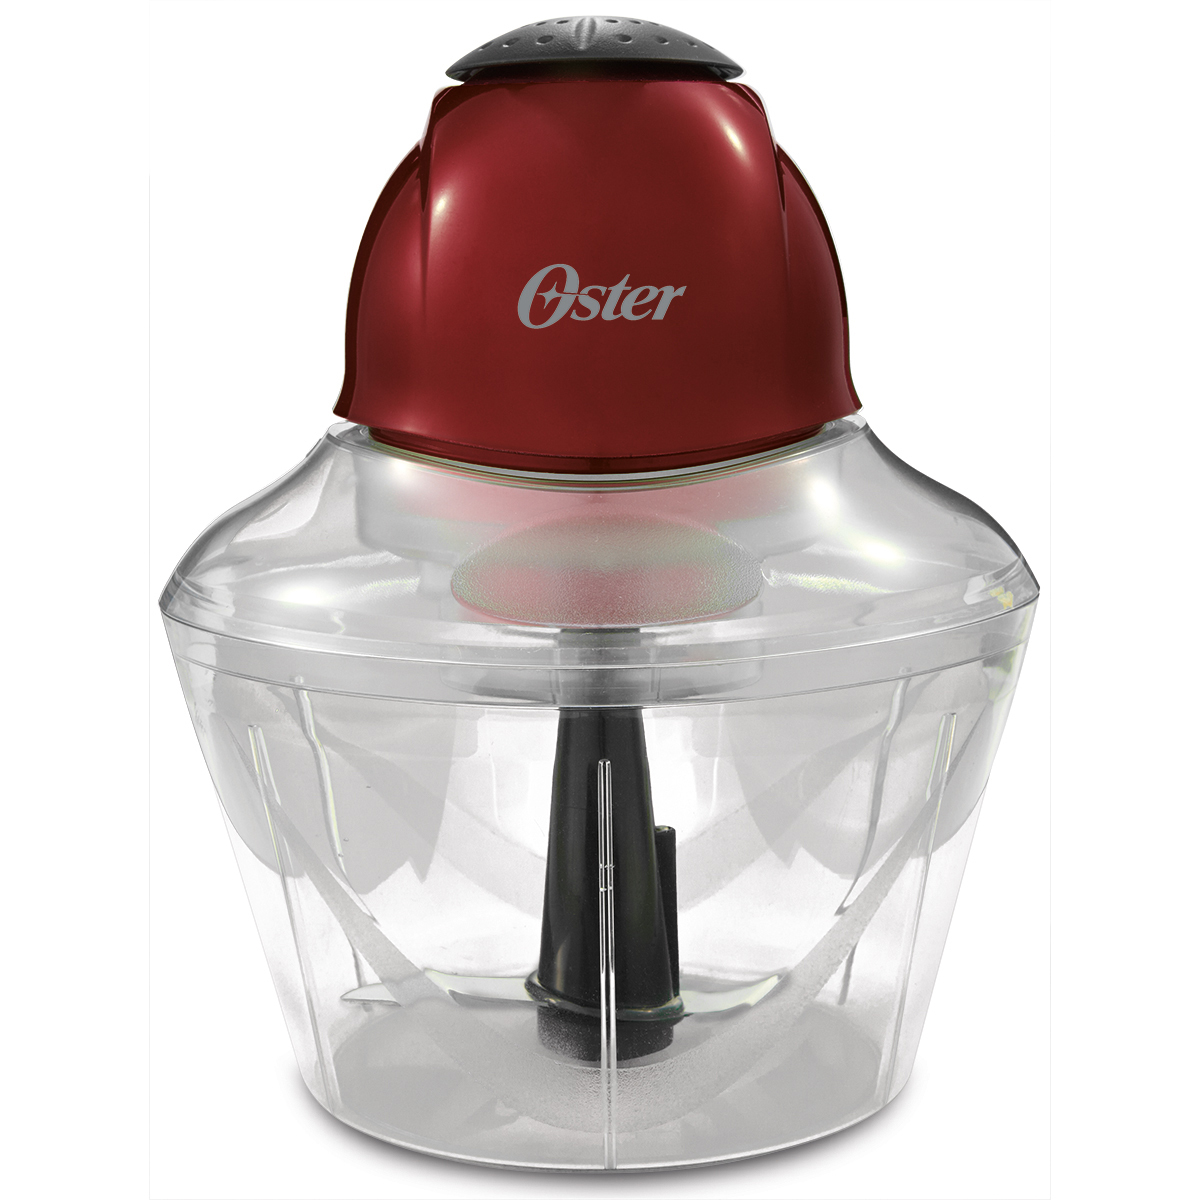 Oster Top Chop Food Chopper, 4-Cup Capacity (FPSTMC1250) - image 2 of 5